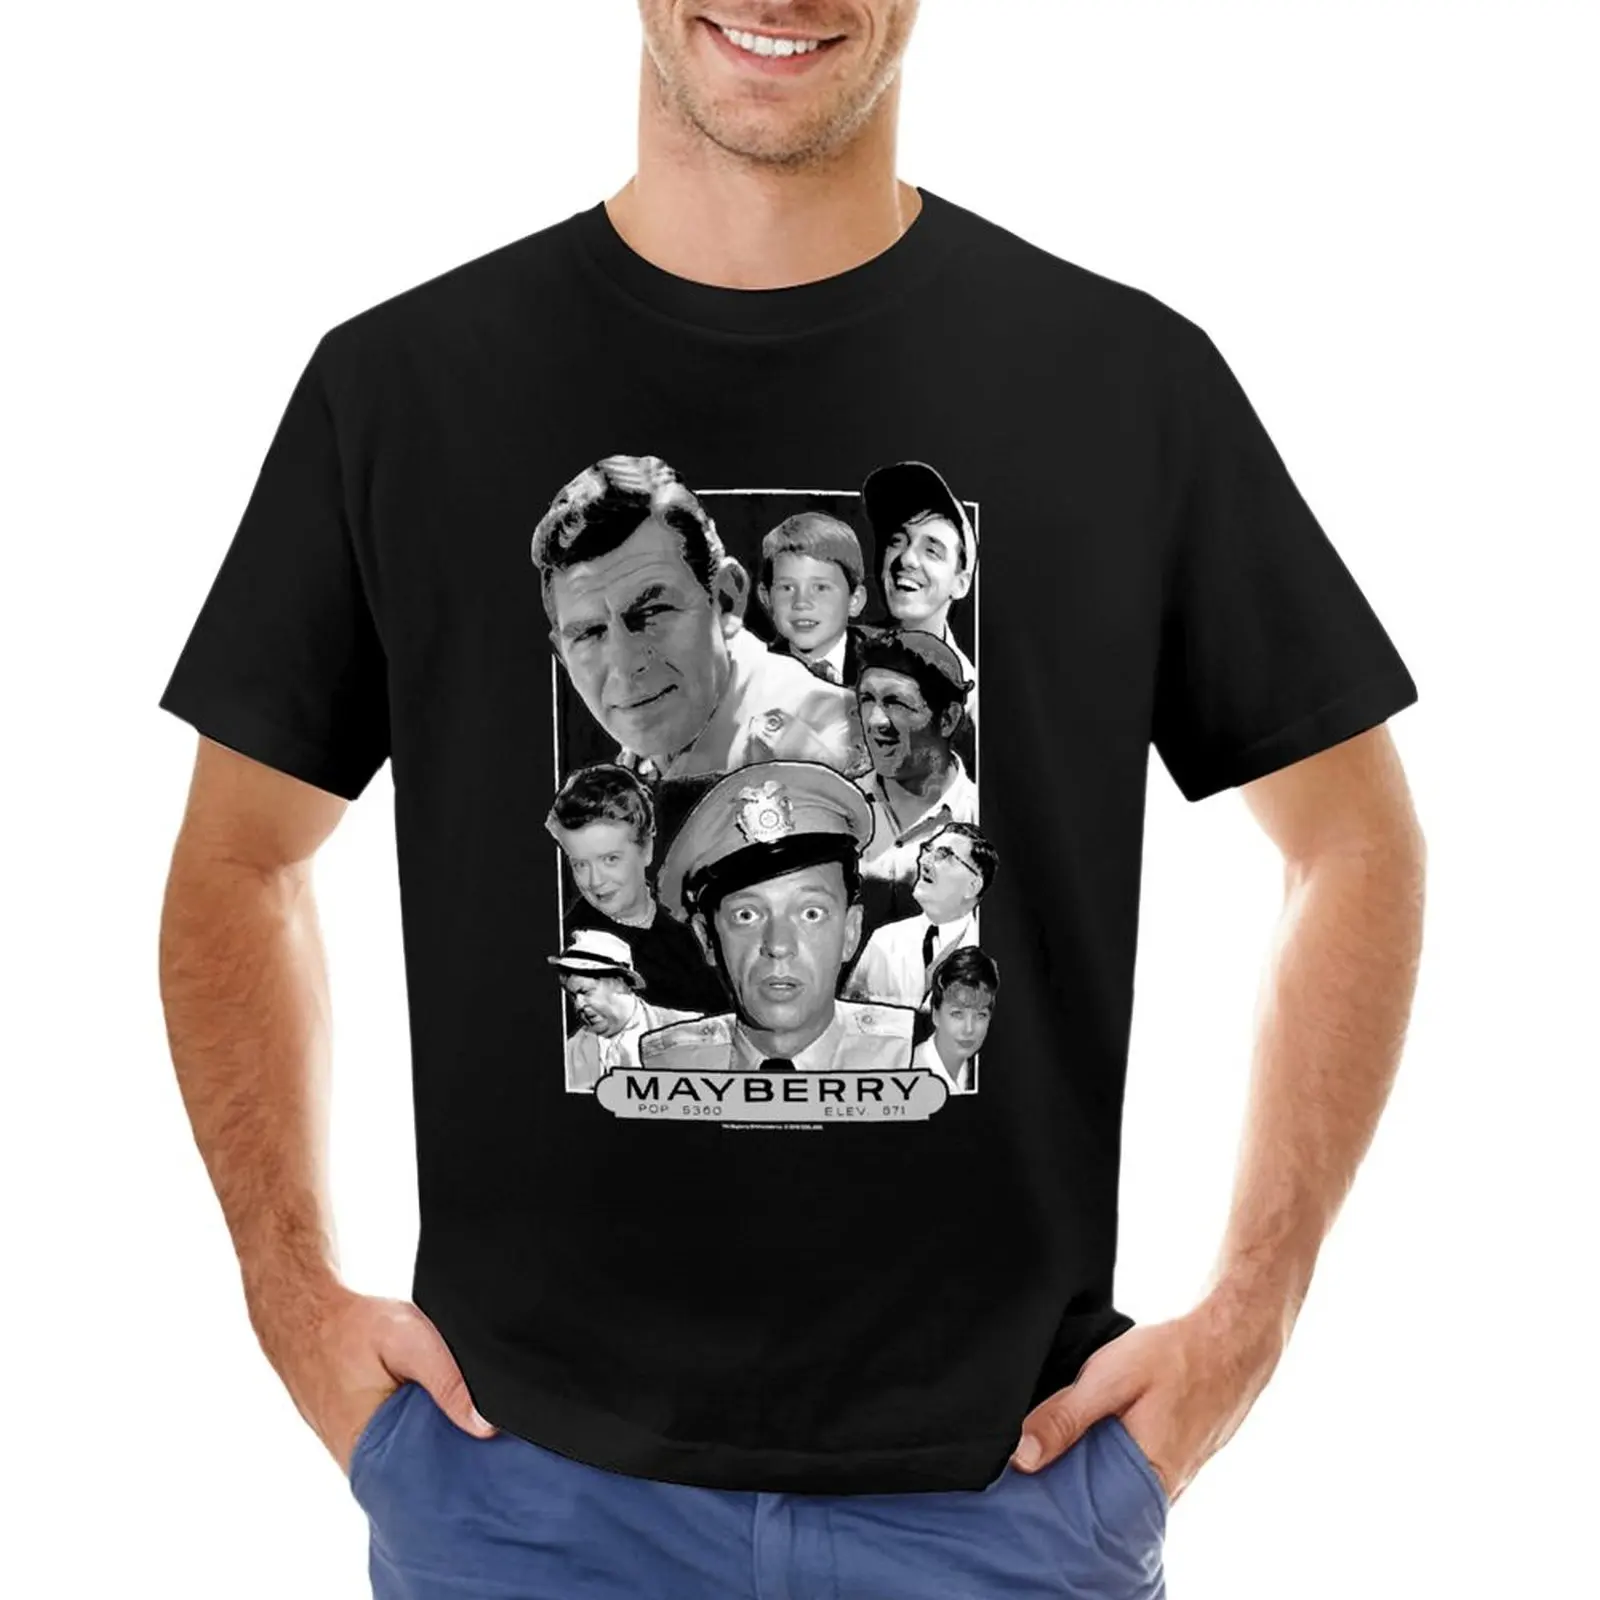 

First Day Of Retro Andy Griffith Mayberry T-Shirt tops black t shirts custom t shirts Men's cotton t-shirt